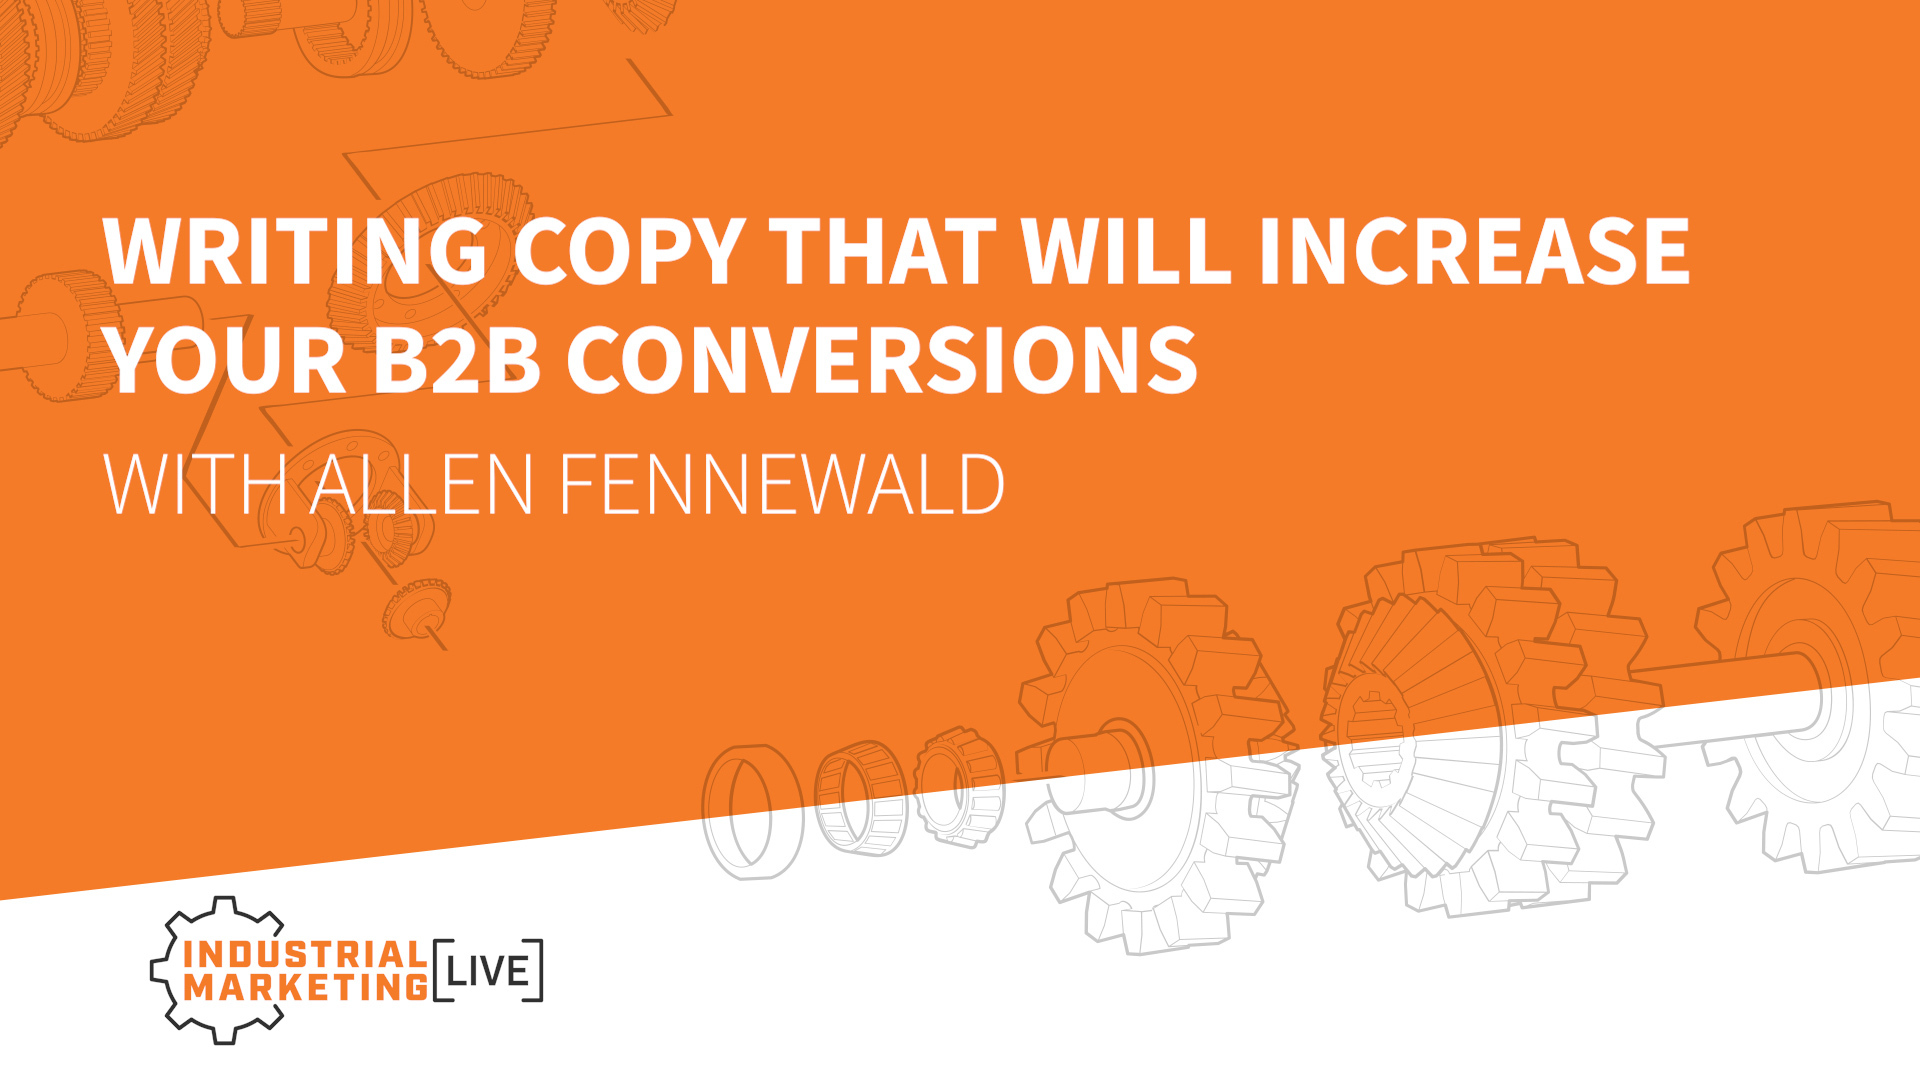 Writing Copy that will increase your B2B conversions